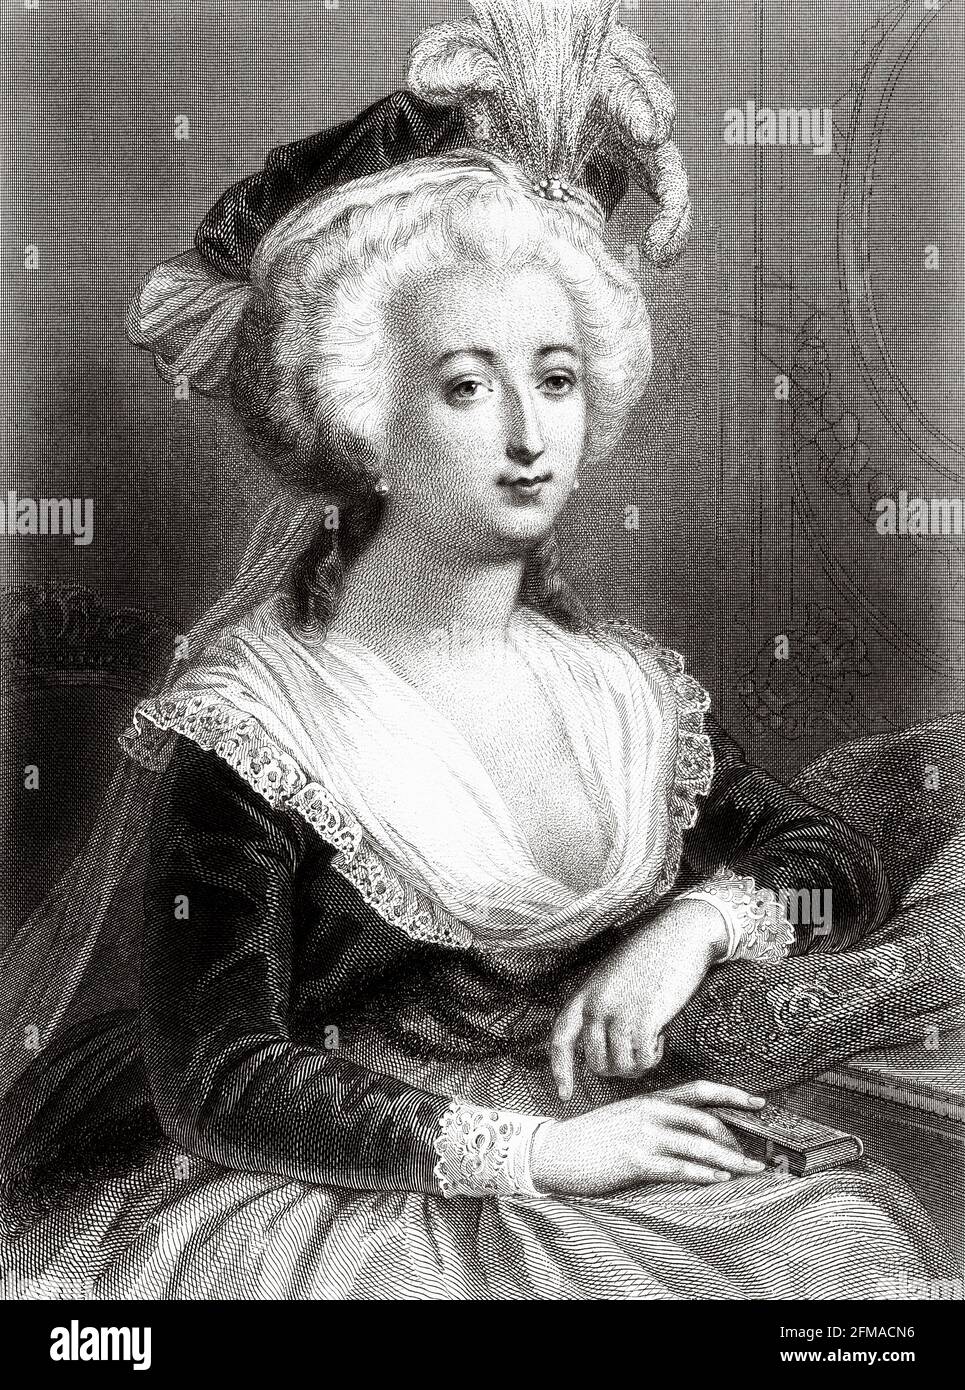 Portrait of Marie Antoinette. Maria Antonia Josepha Johanna (1755-1793) was the last queen of France before the French Revolution. During the Revolution, she became known as Madame Déficit because the country's financial crisis was blamed on her lavish spending and her opposition to the social and financial reforms of Turgot and Necker. France. Old 19th century engraved illustration from Galerie de Femmes Celebres by M. Sainte-Beuve 1864 Stock Photo